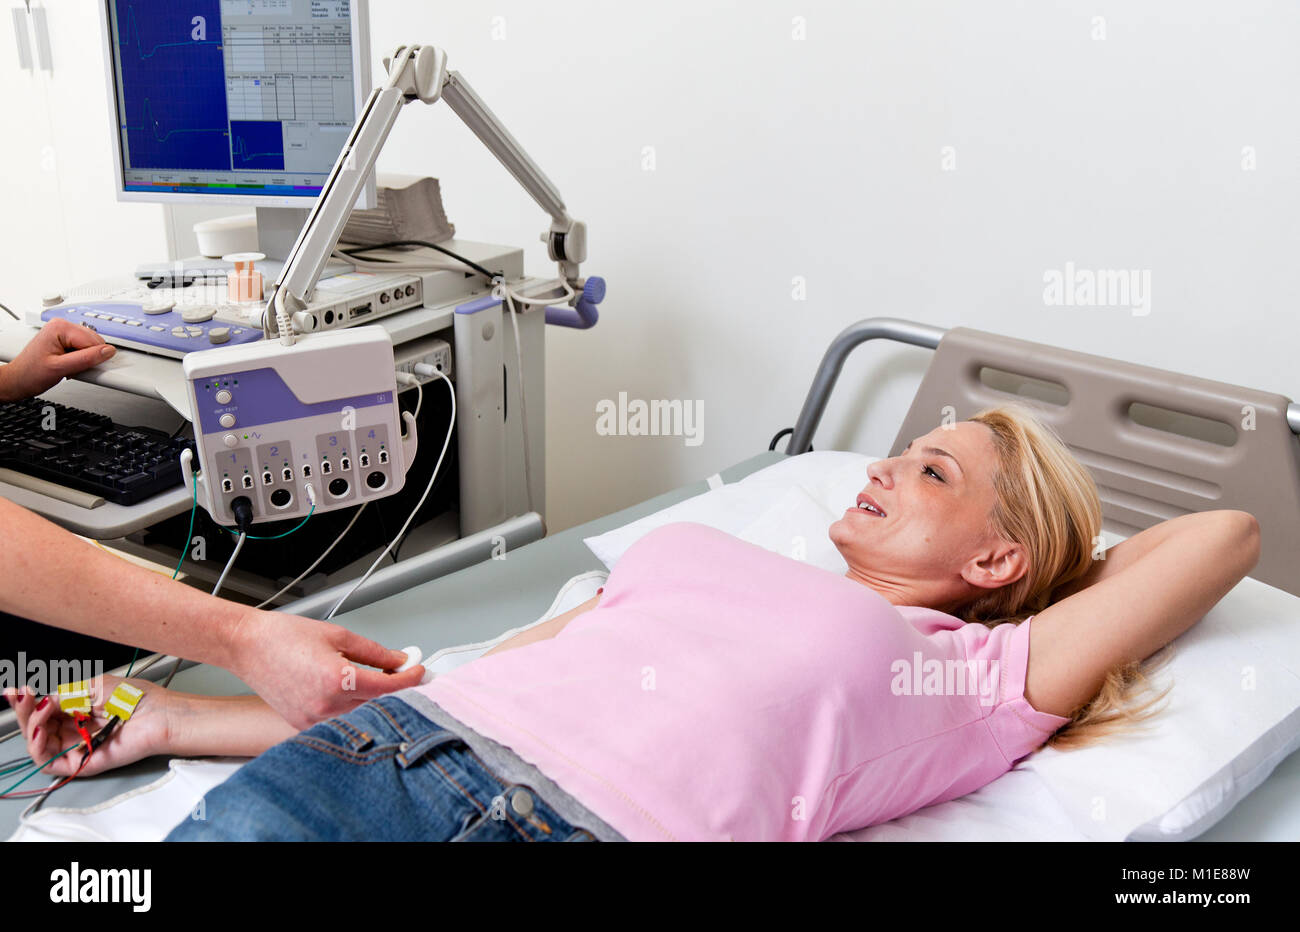 woman lying in hospital bed, being examed with electromyography machine Stock Photo